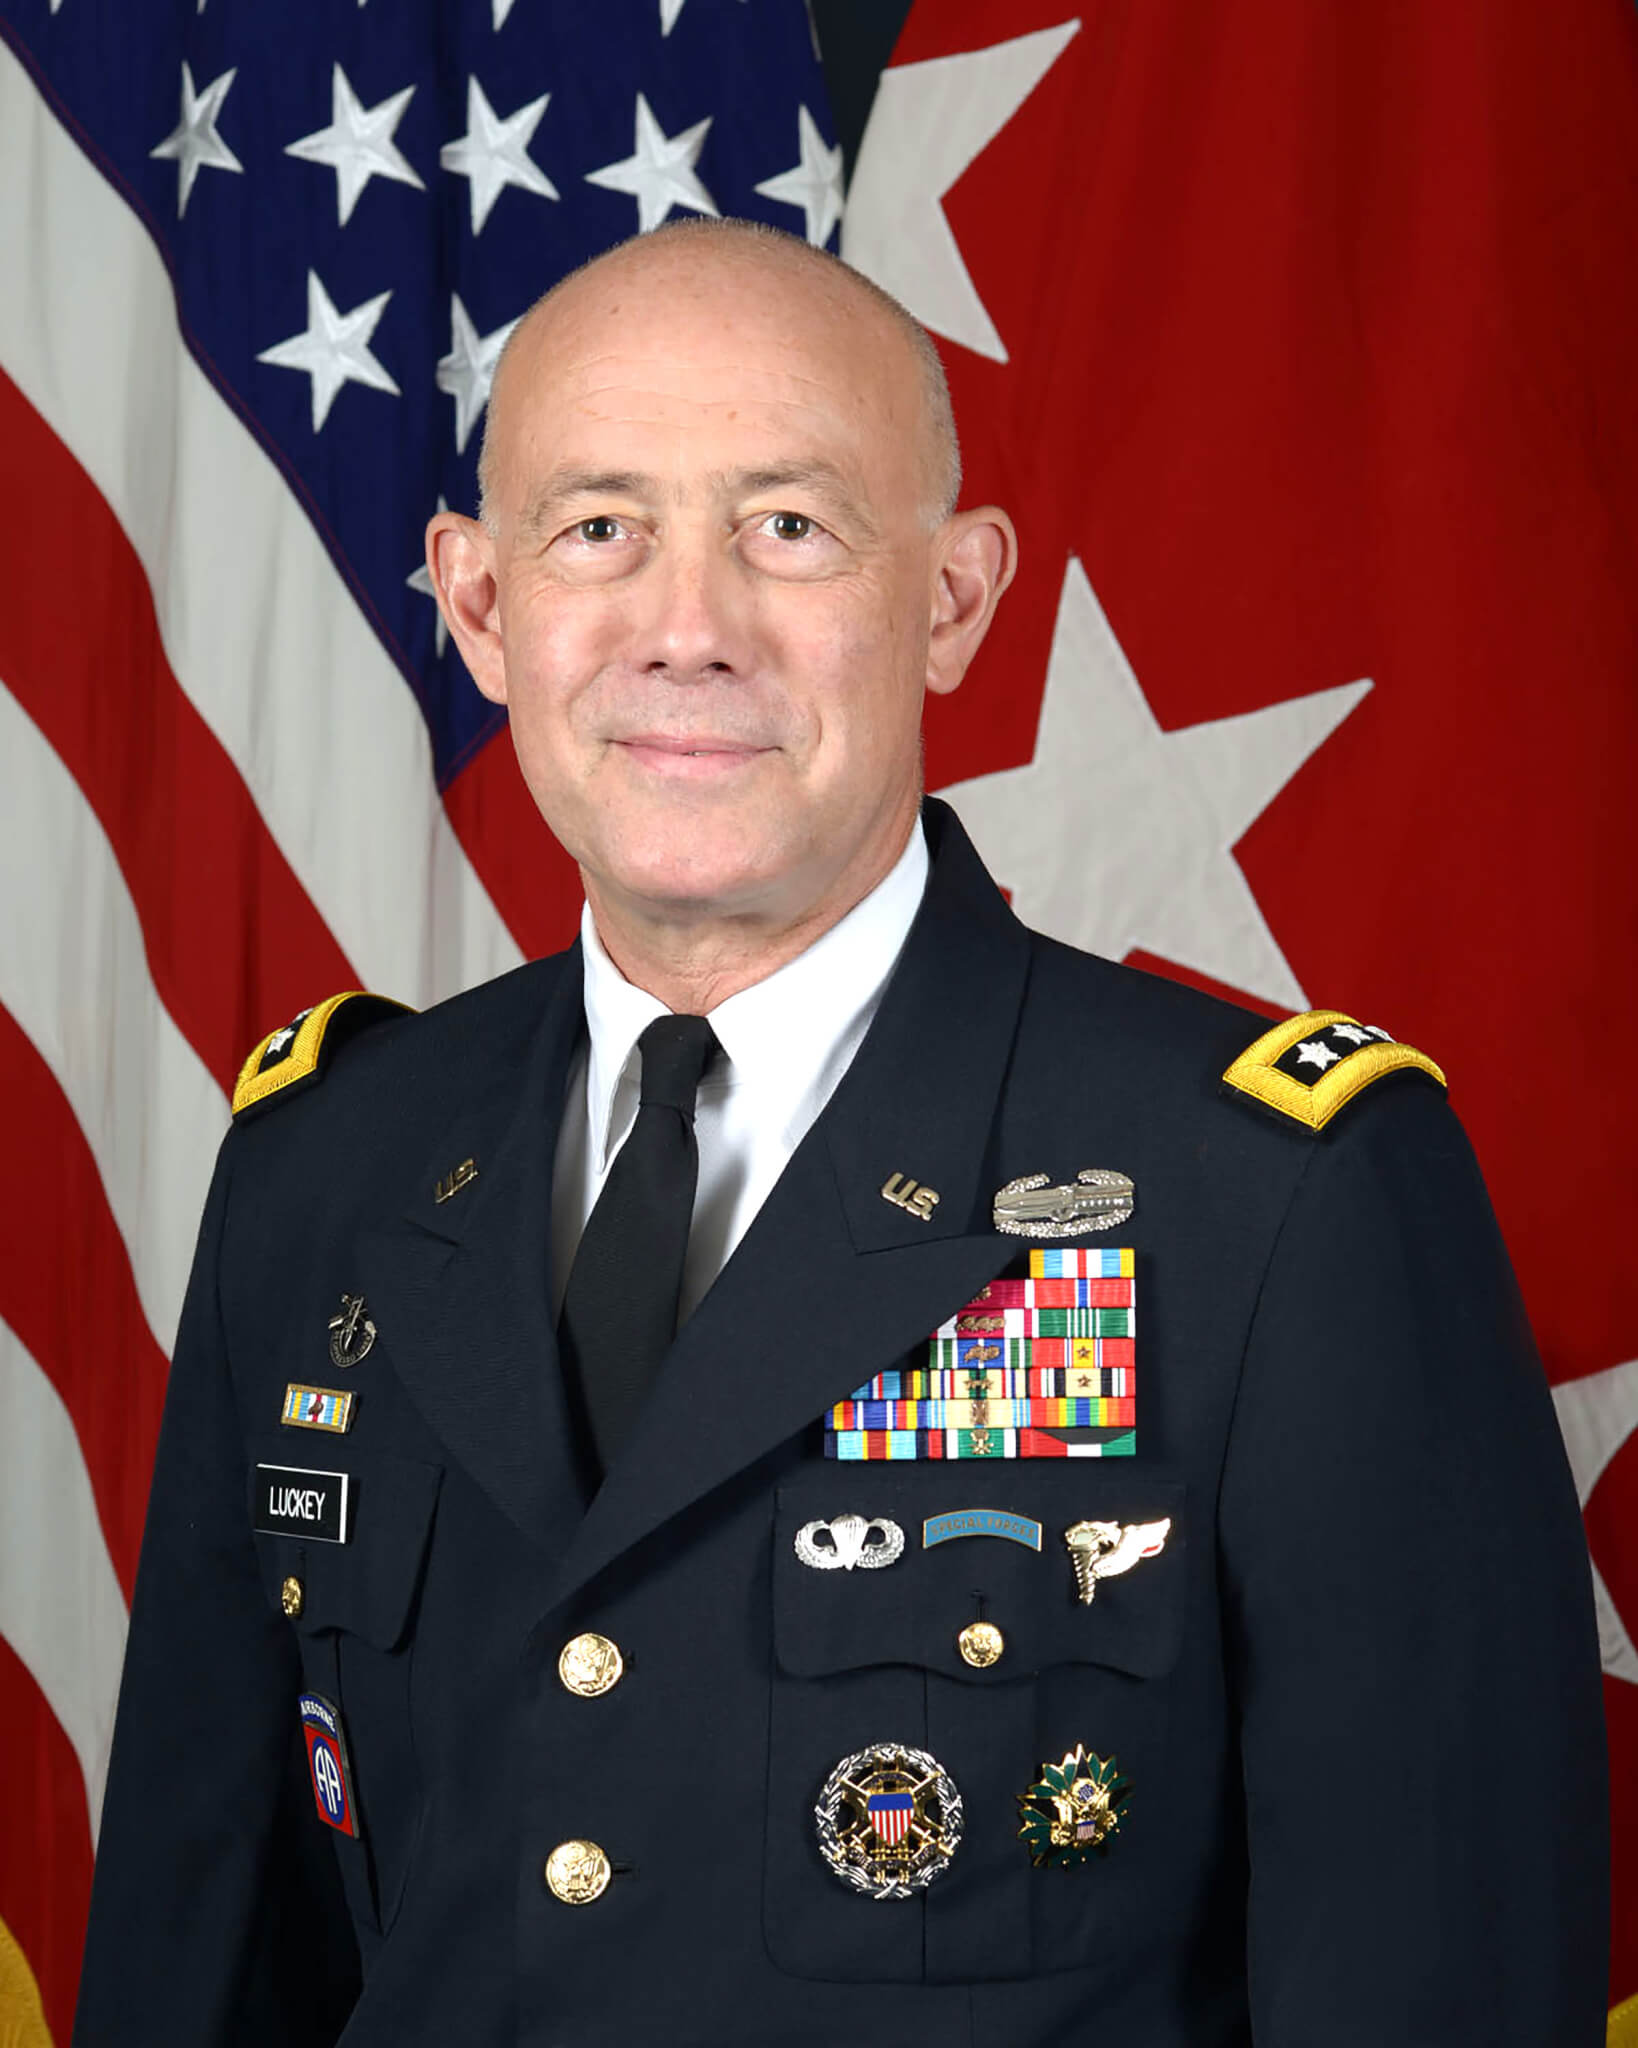 Lt. Gen. Charles D. Luckey, Chief of Army Reserve and Commanding General, United States Army Reserve Command